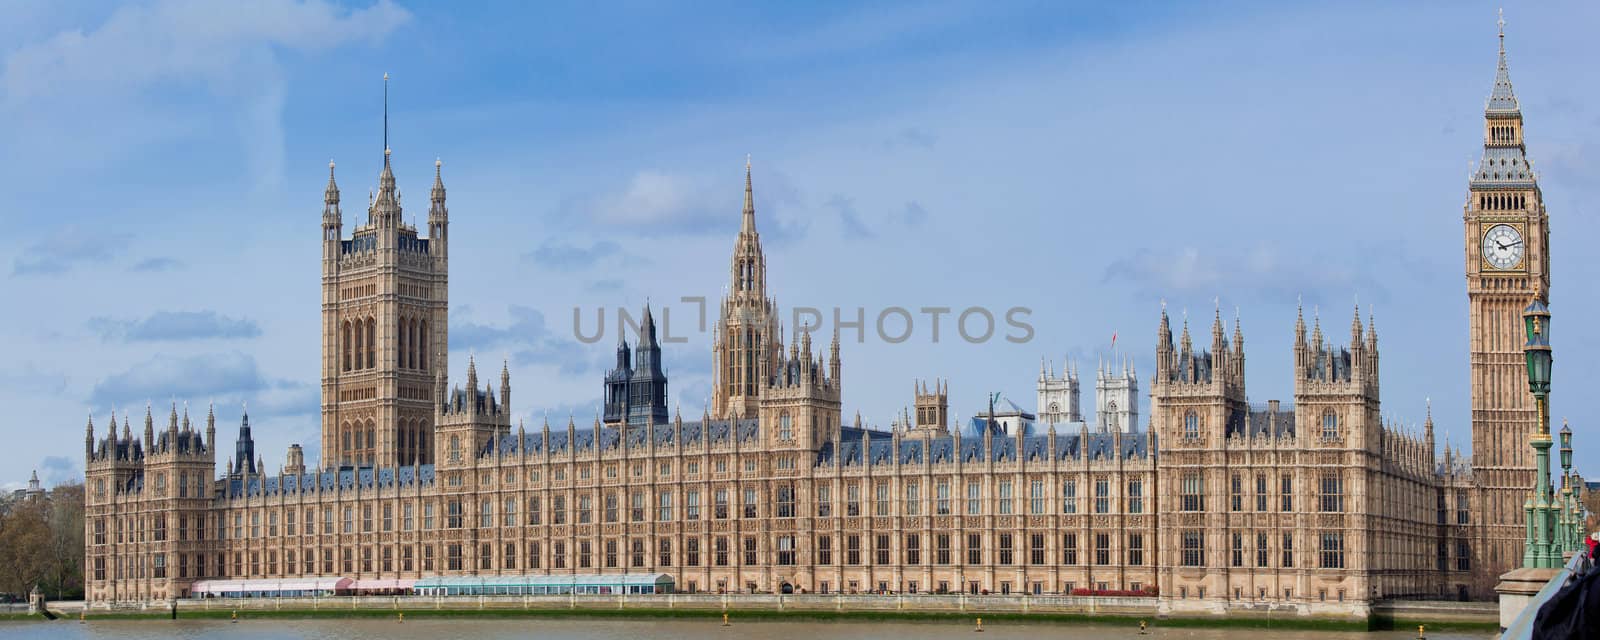 Panorama of Big Ben and House of Parliament at River Thame London England UK